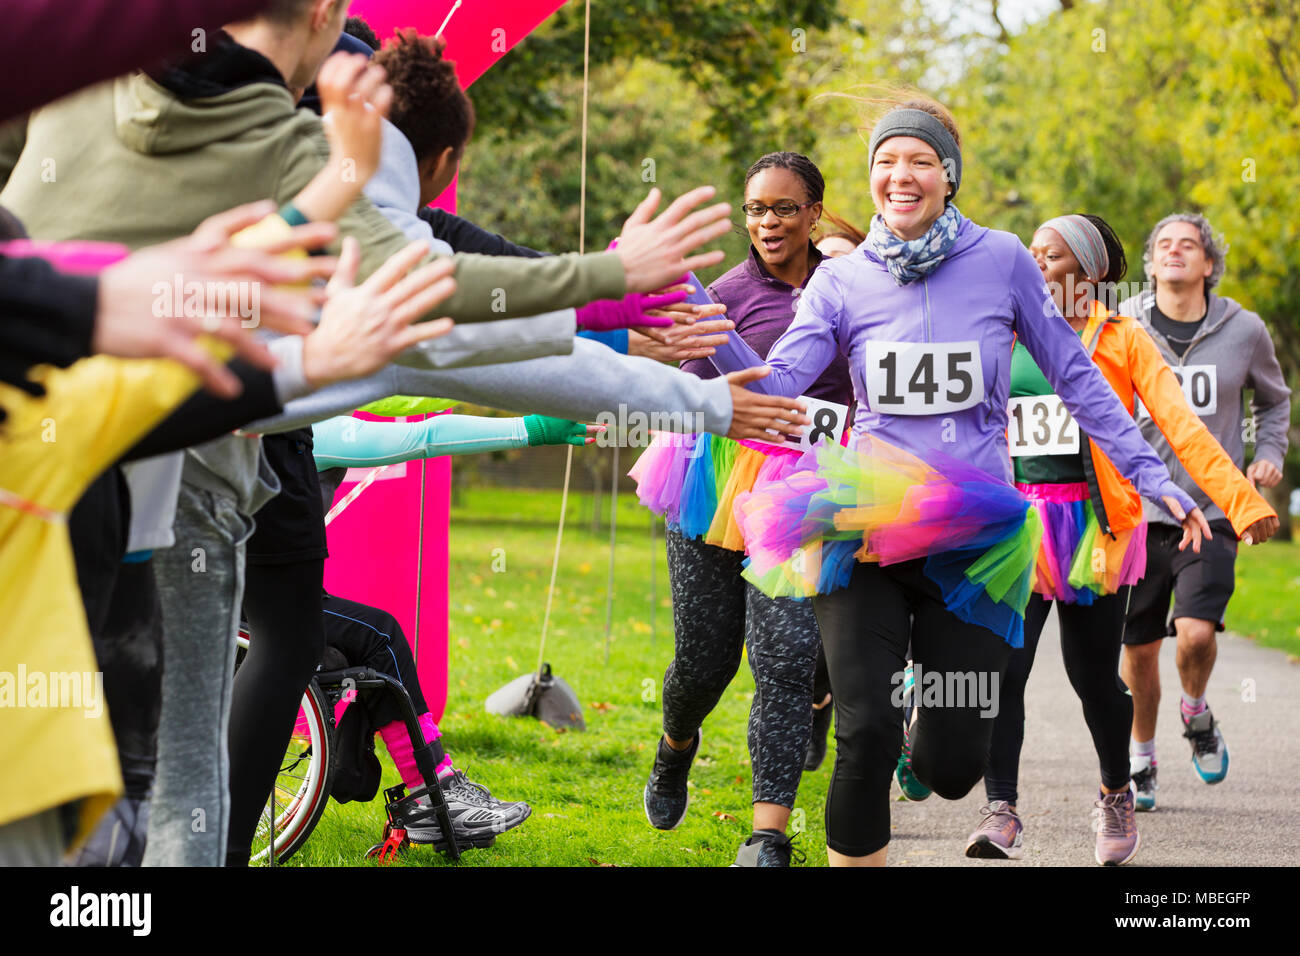 Enthusiastic female runners in tutus high-fiving spectators at charity run in park Stock Photo